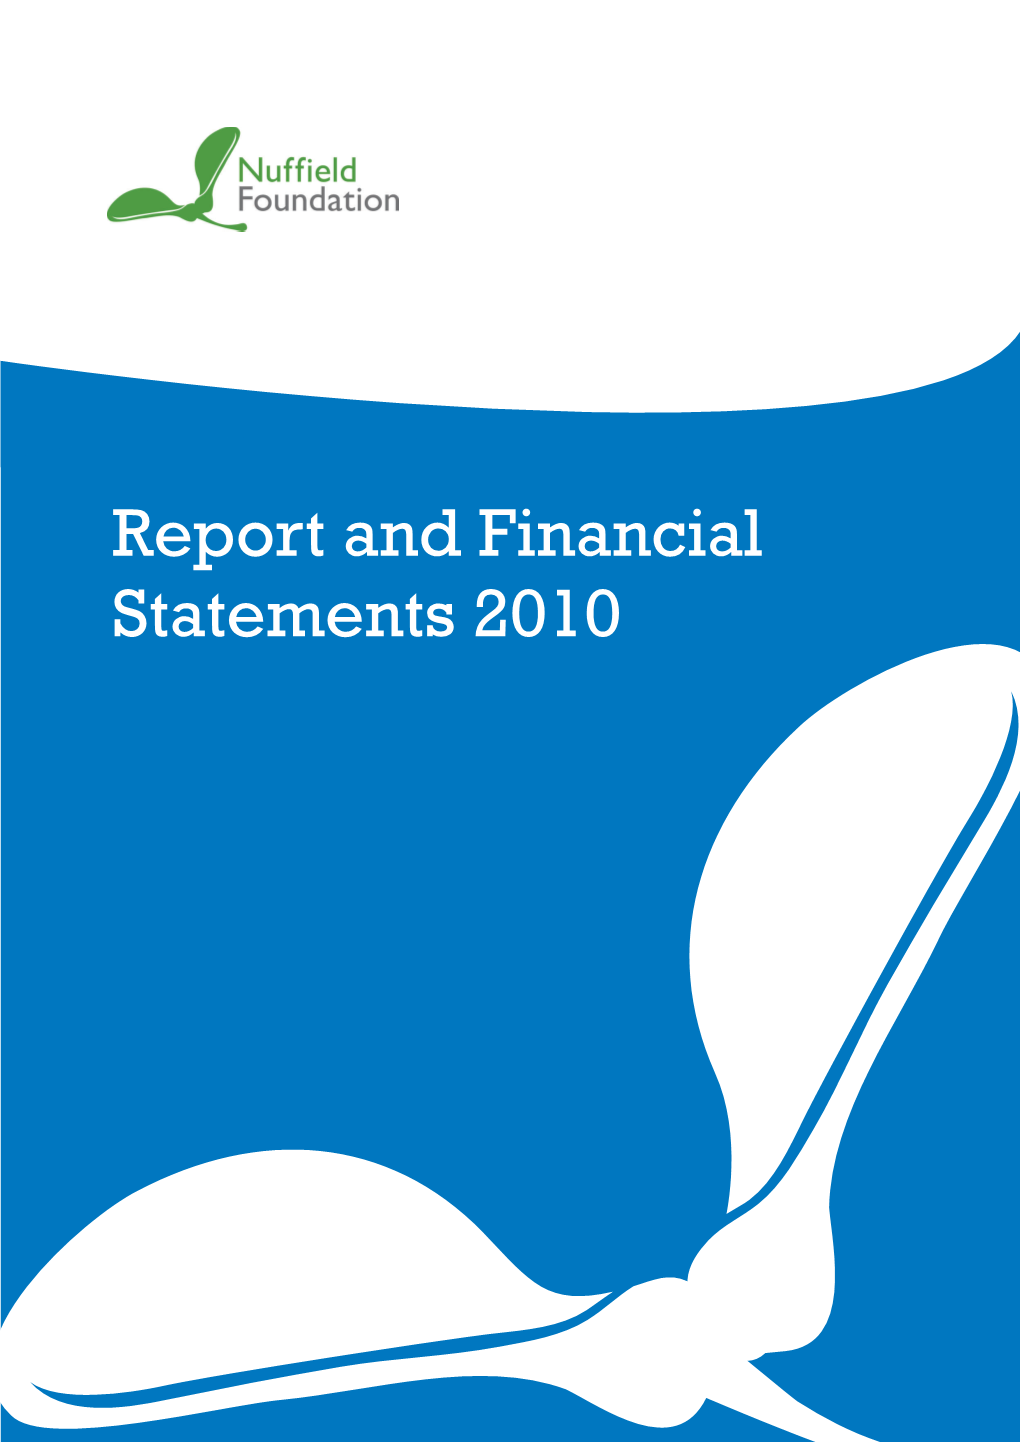 Report and Financial Statements 2010